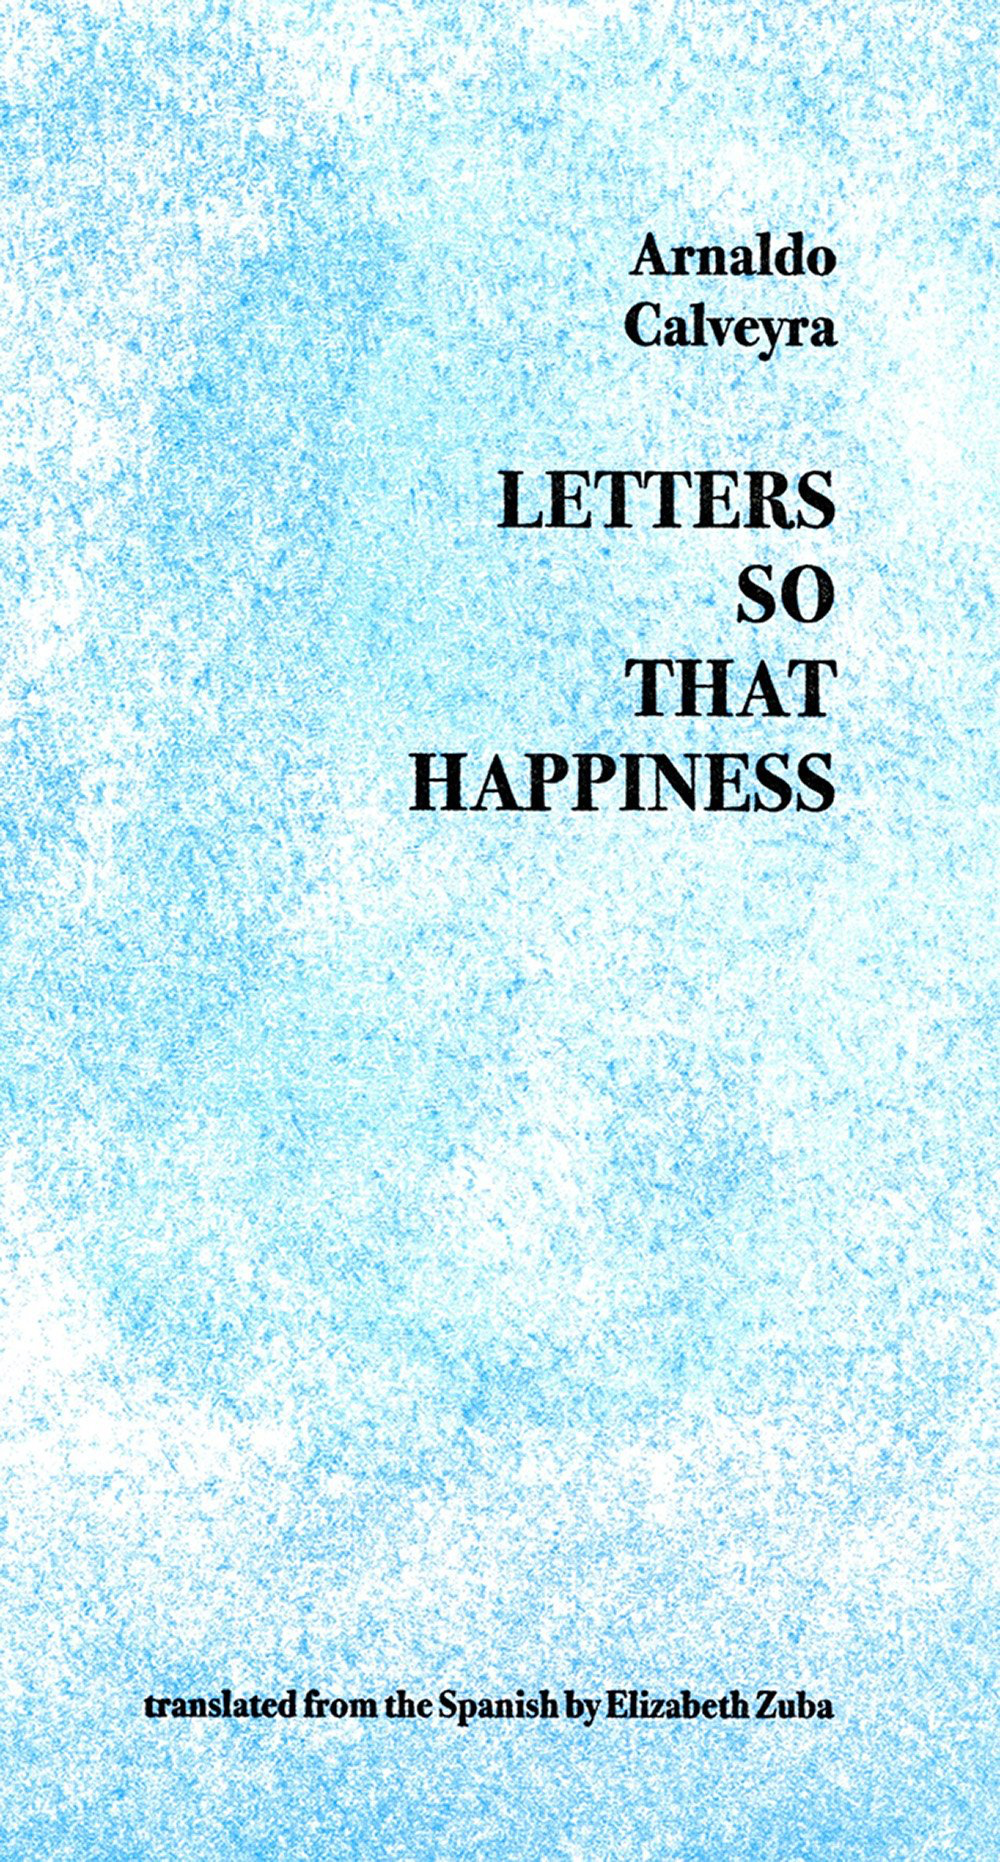 Letters So That Happiness